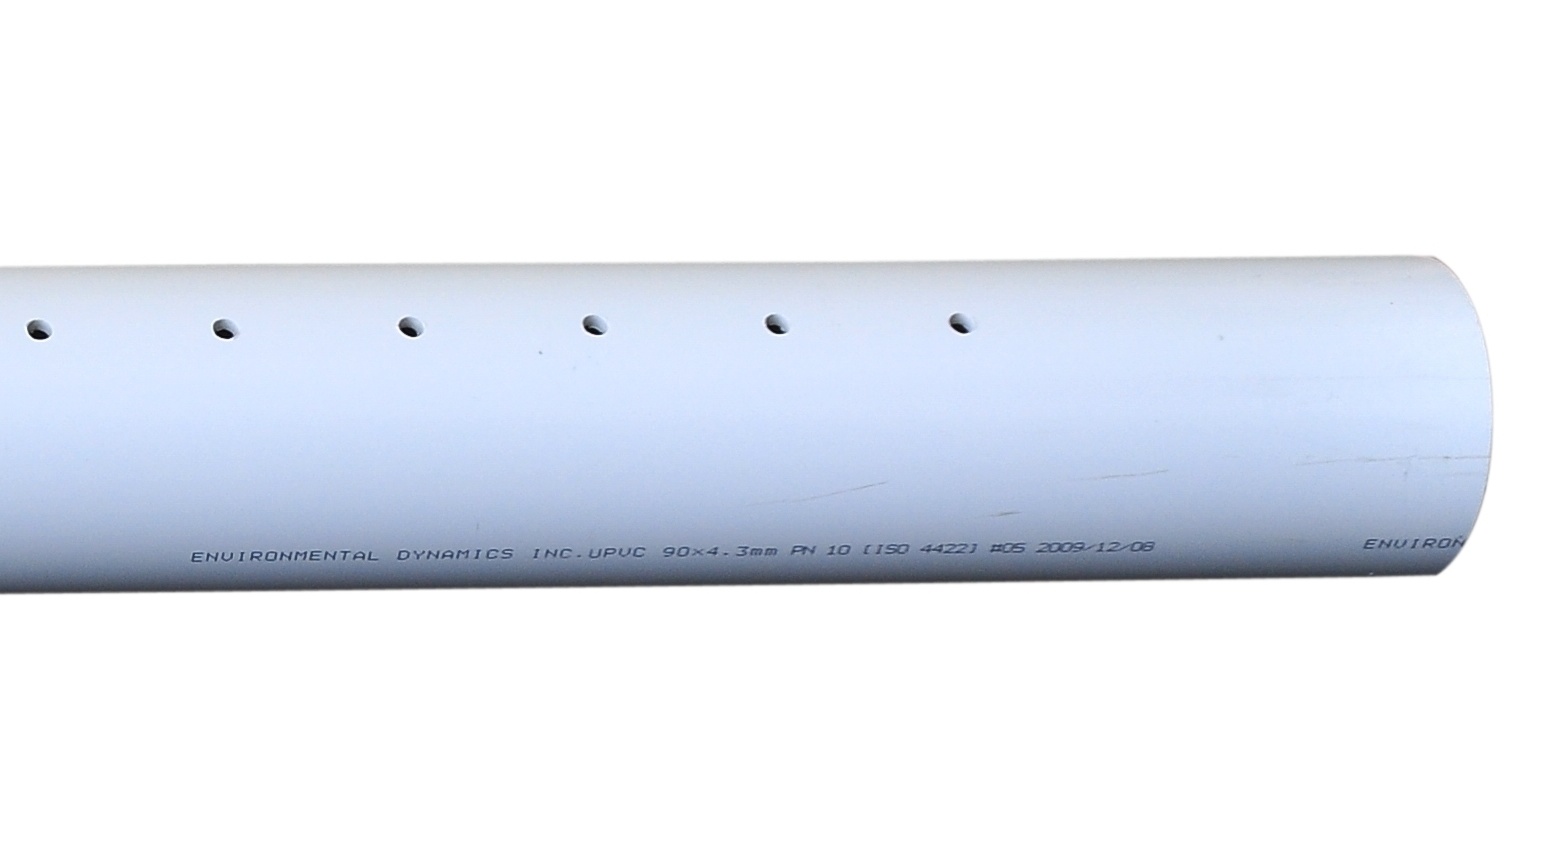 Perforated PVC Pipe